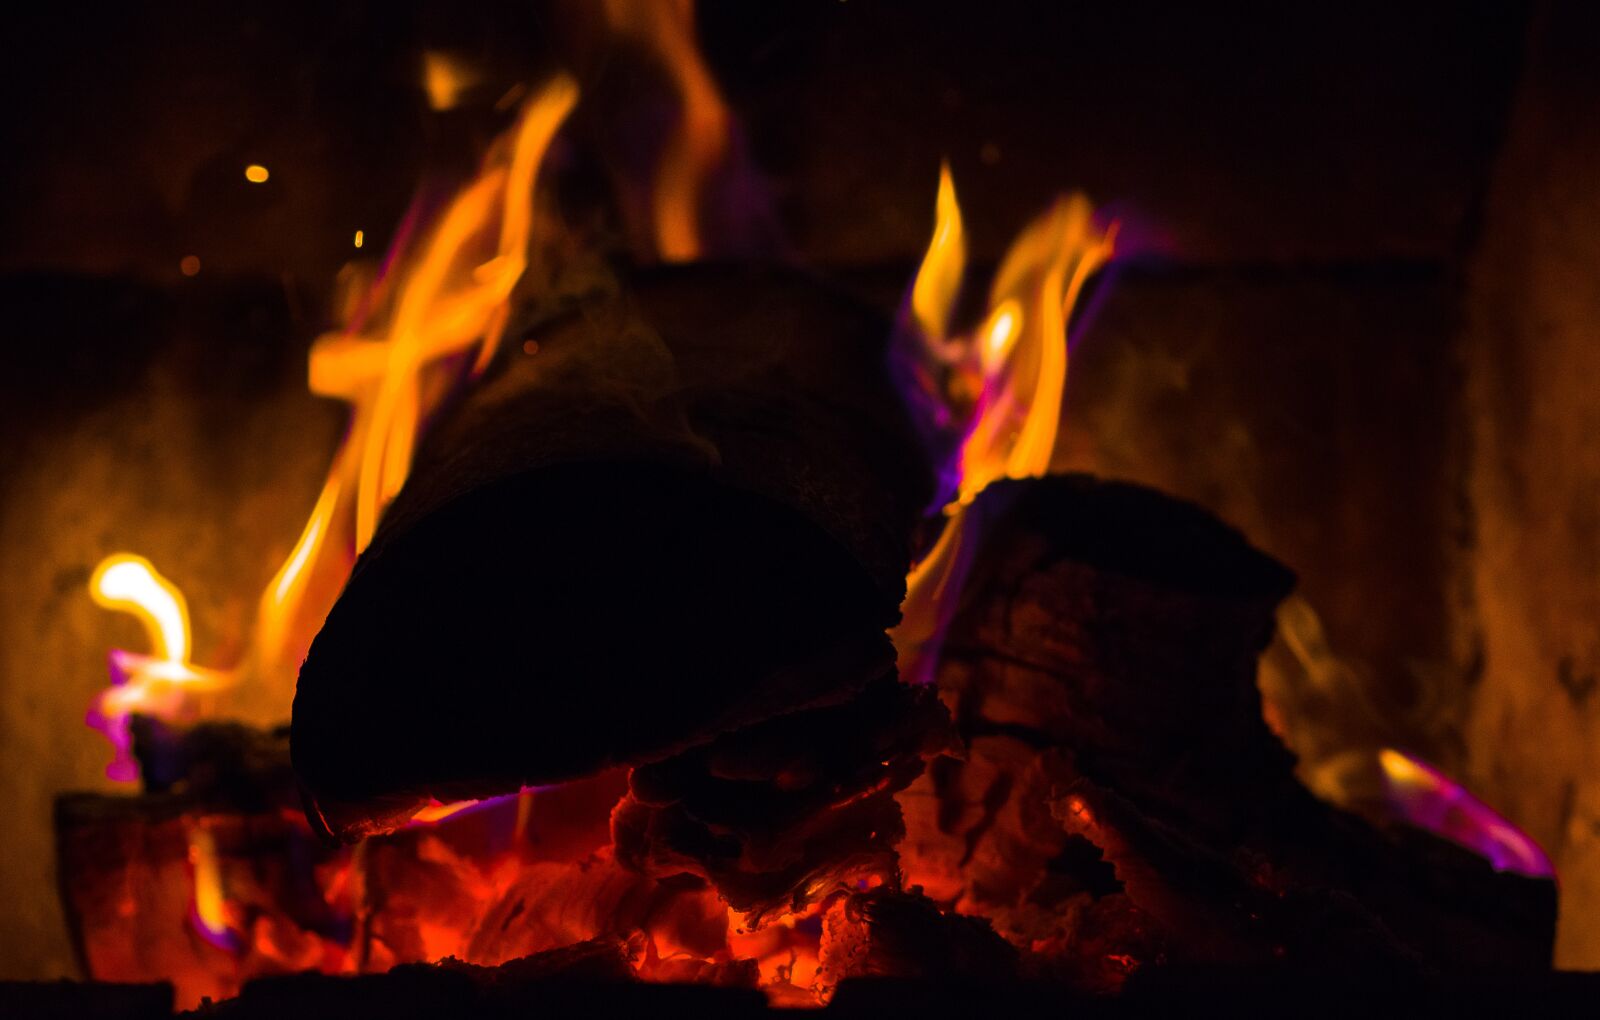 Pentax K-70 + Tamron SP AF 90mm F2.8 Di Macro sample photo. Fire, flame, embers photography